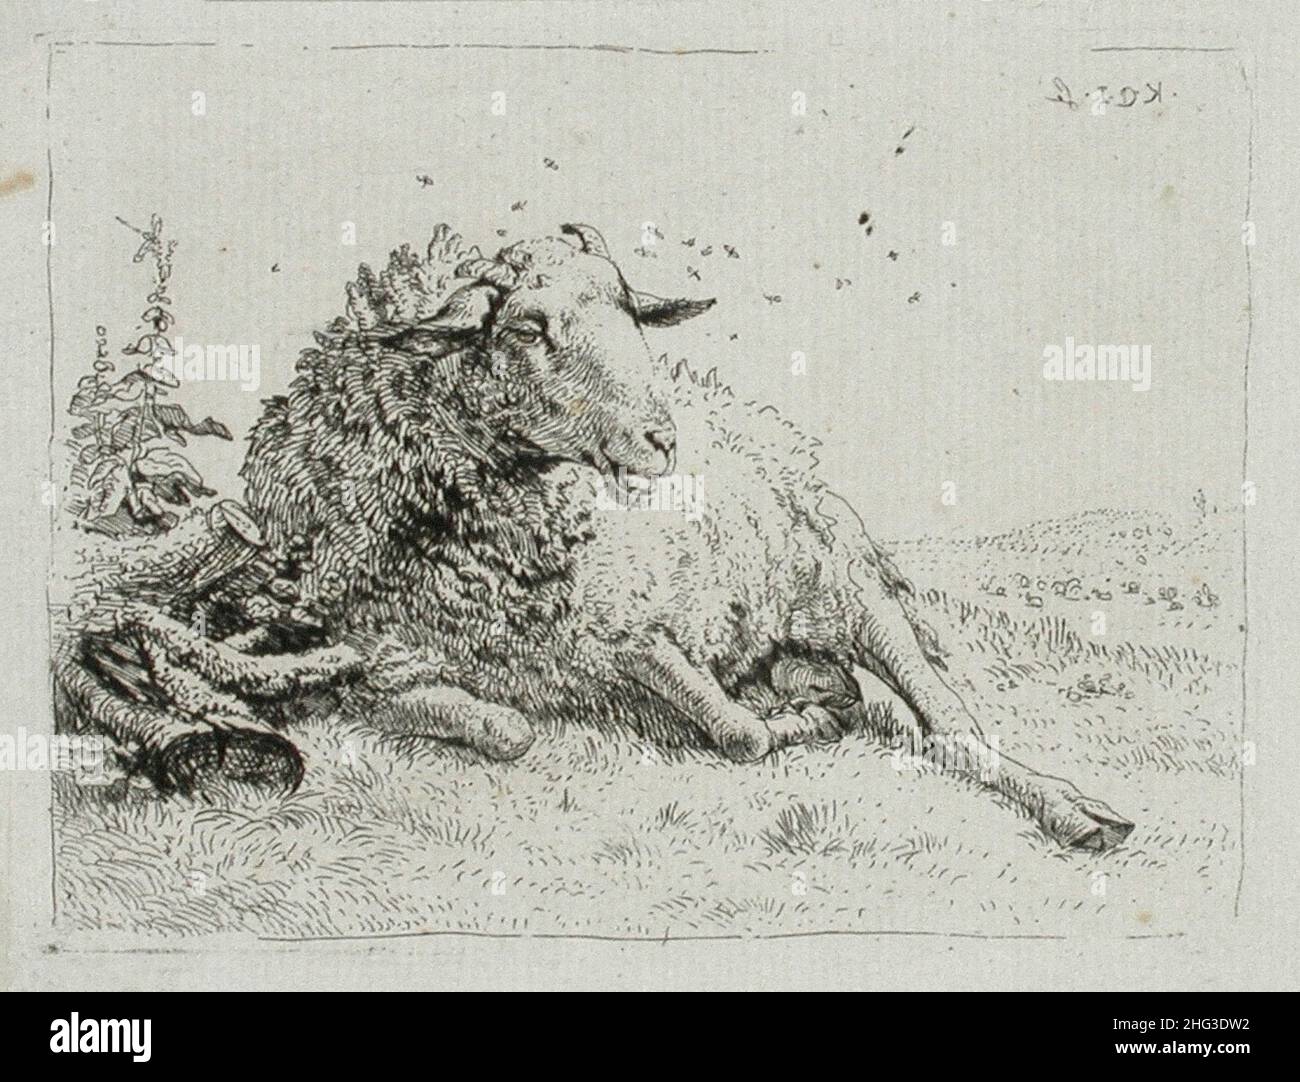 The 17th century engraving of Lamb next to tree root. By Karel Dujardin (1626-1678). Stock Photo